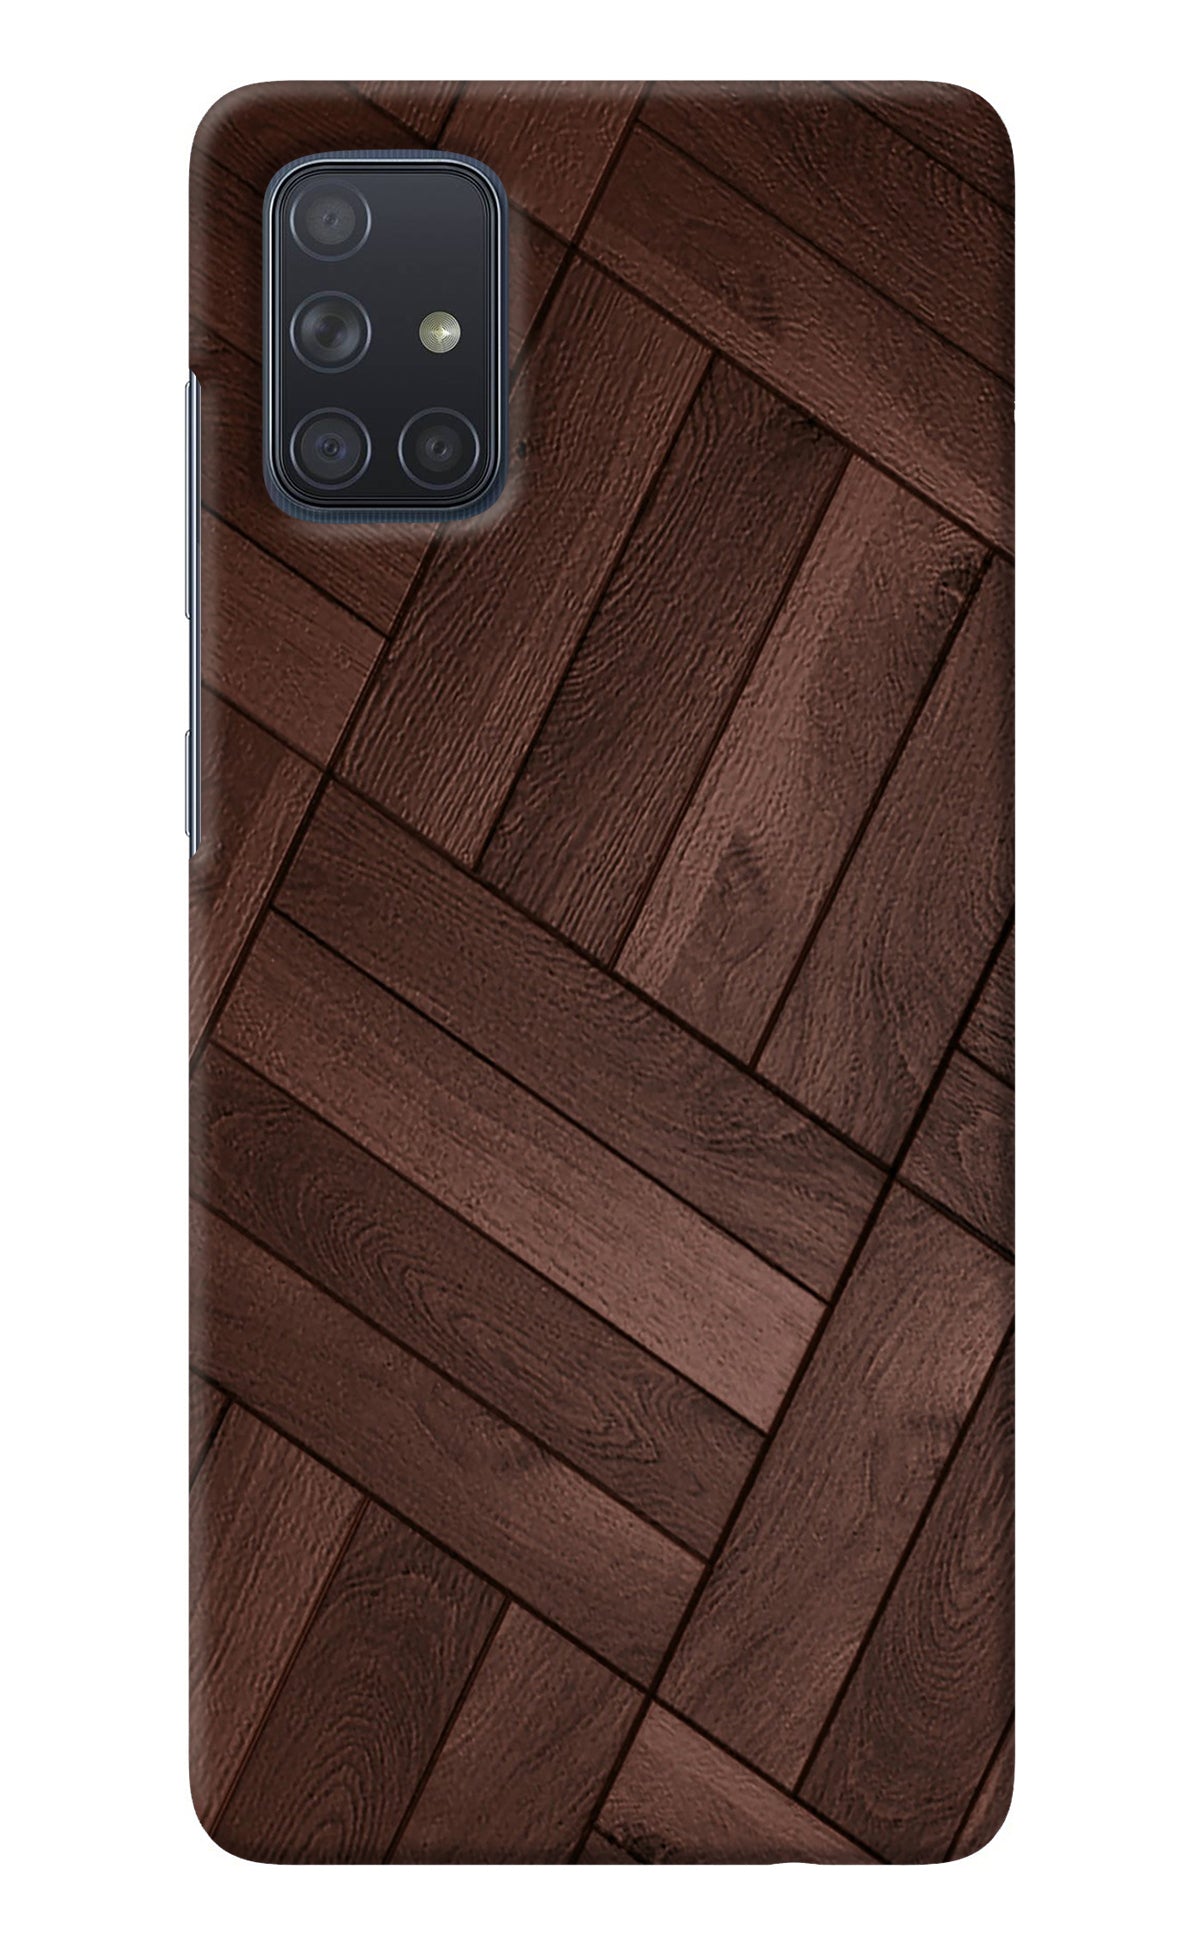 Wooden Texture Design Samsung A71 Back Cover